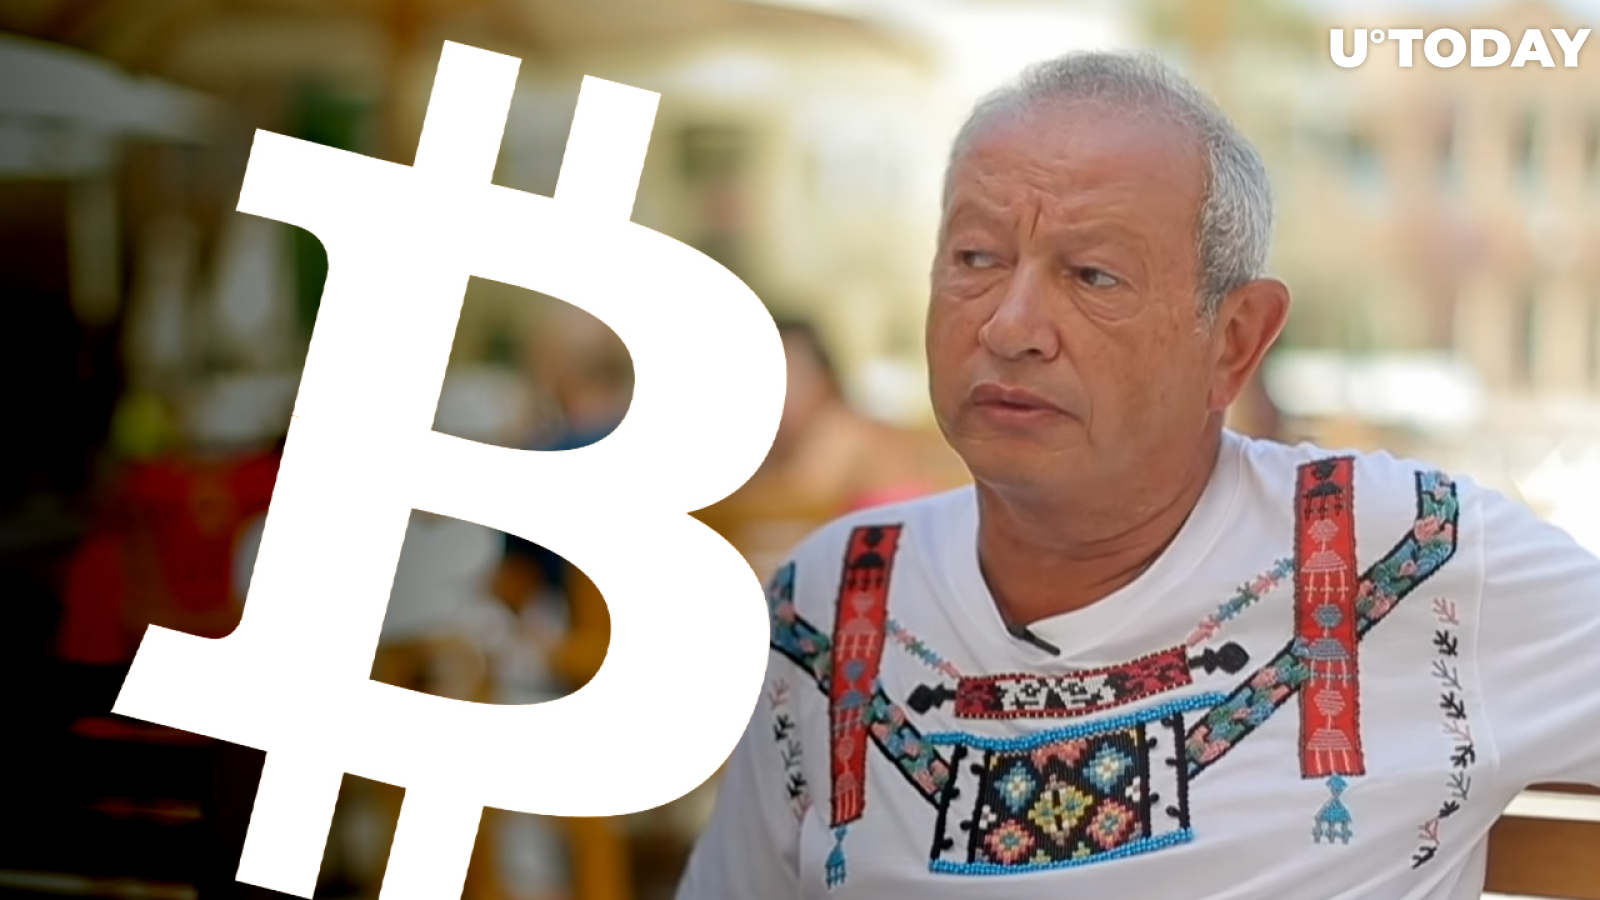 Egyptian Billionaire Warns Against Bitcoin, Says It Could Be Hacked